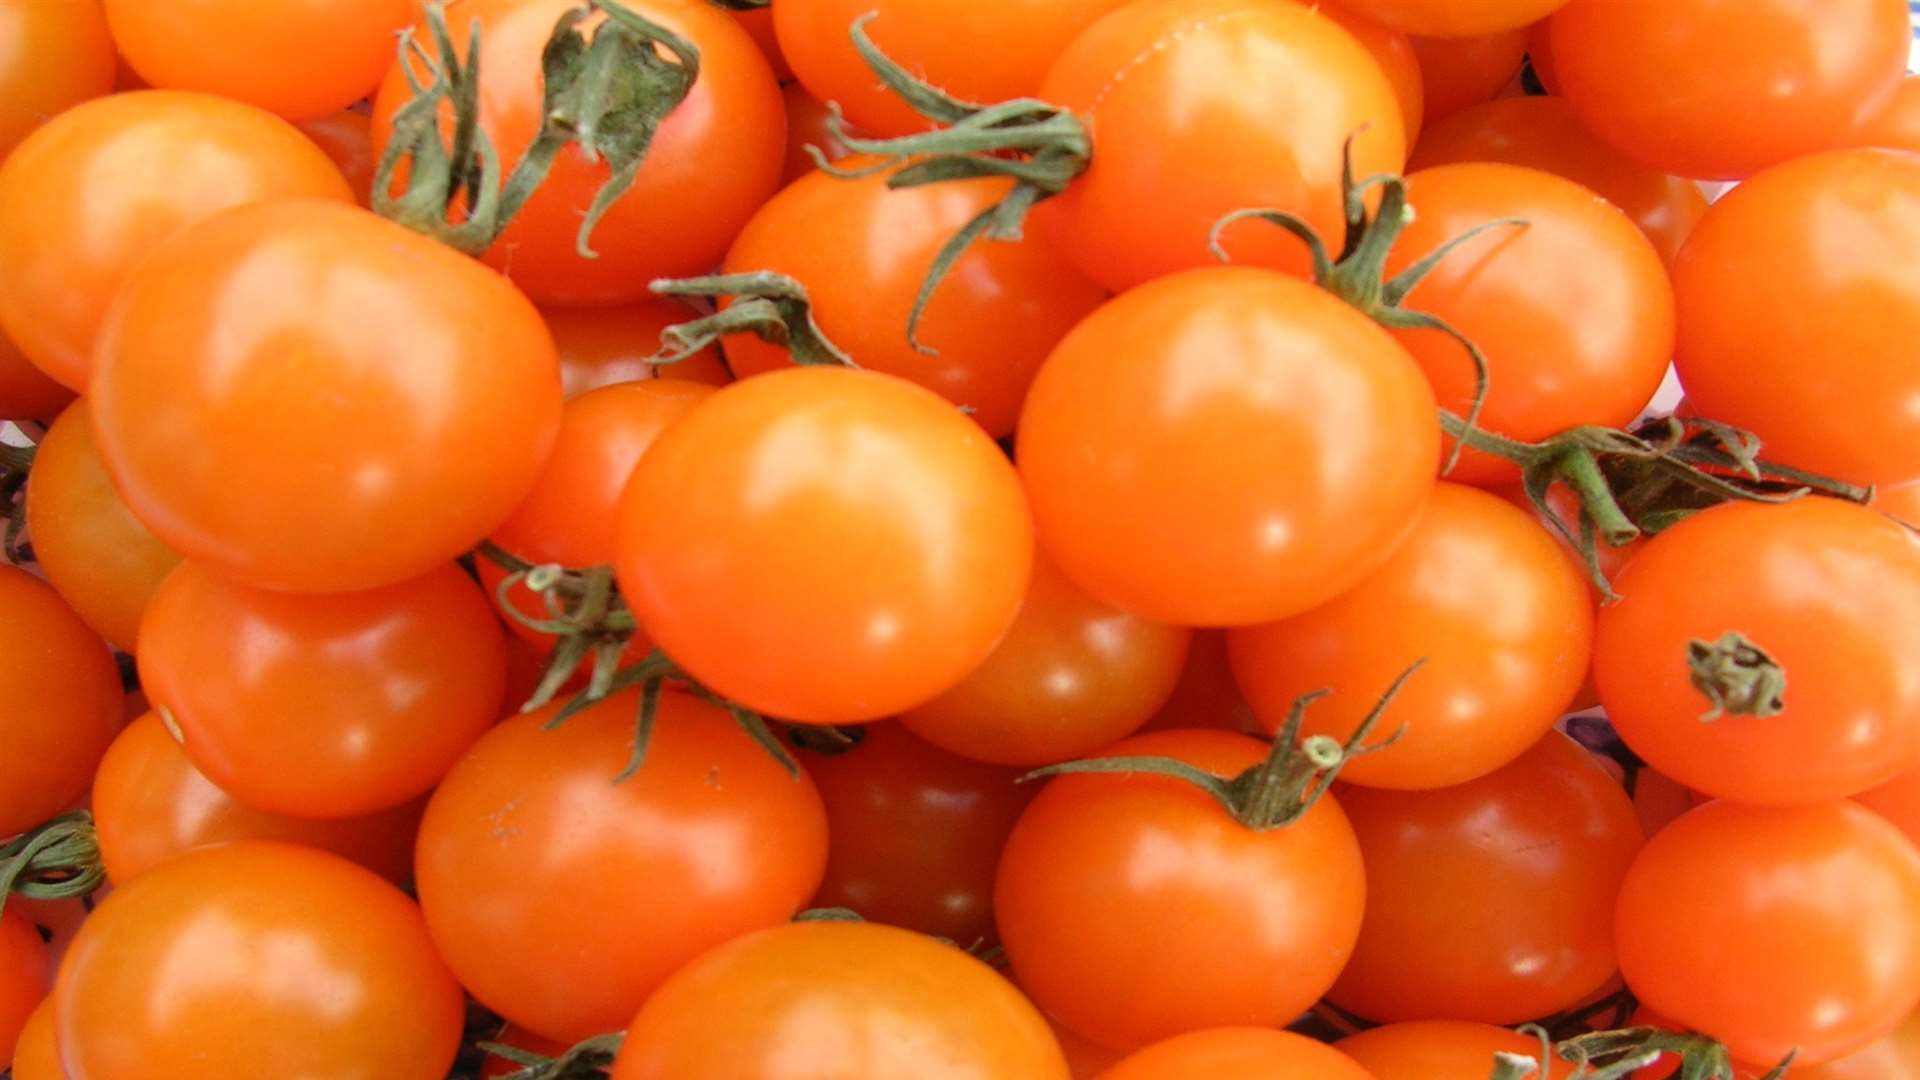 APS Group is the largest tomato grower in the UK